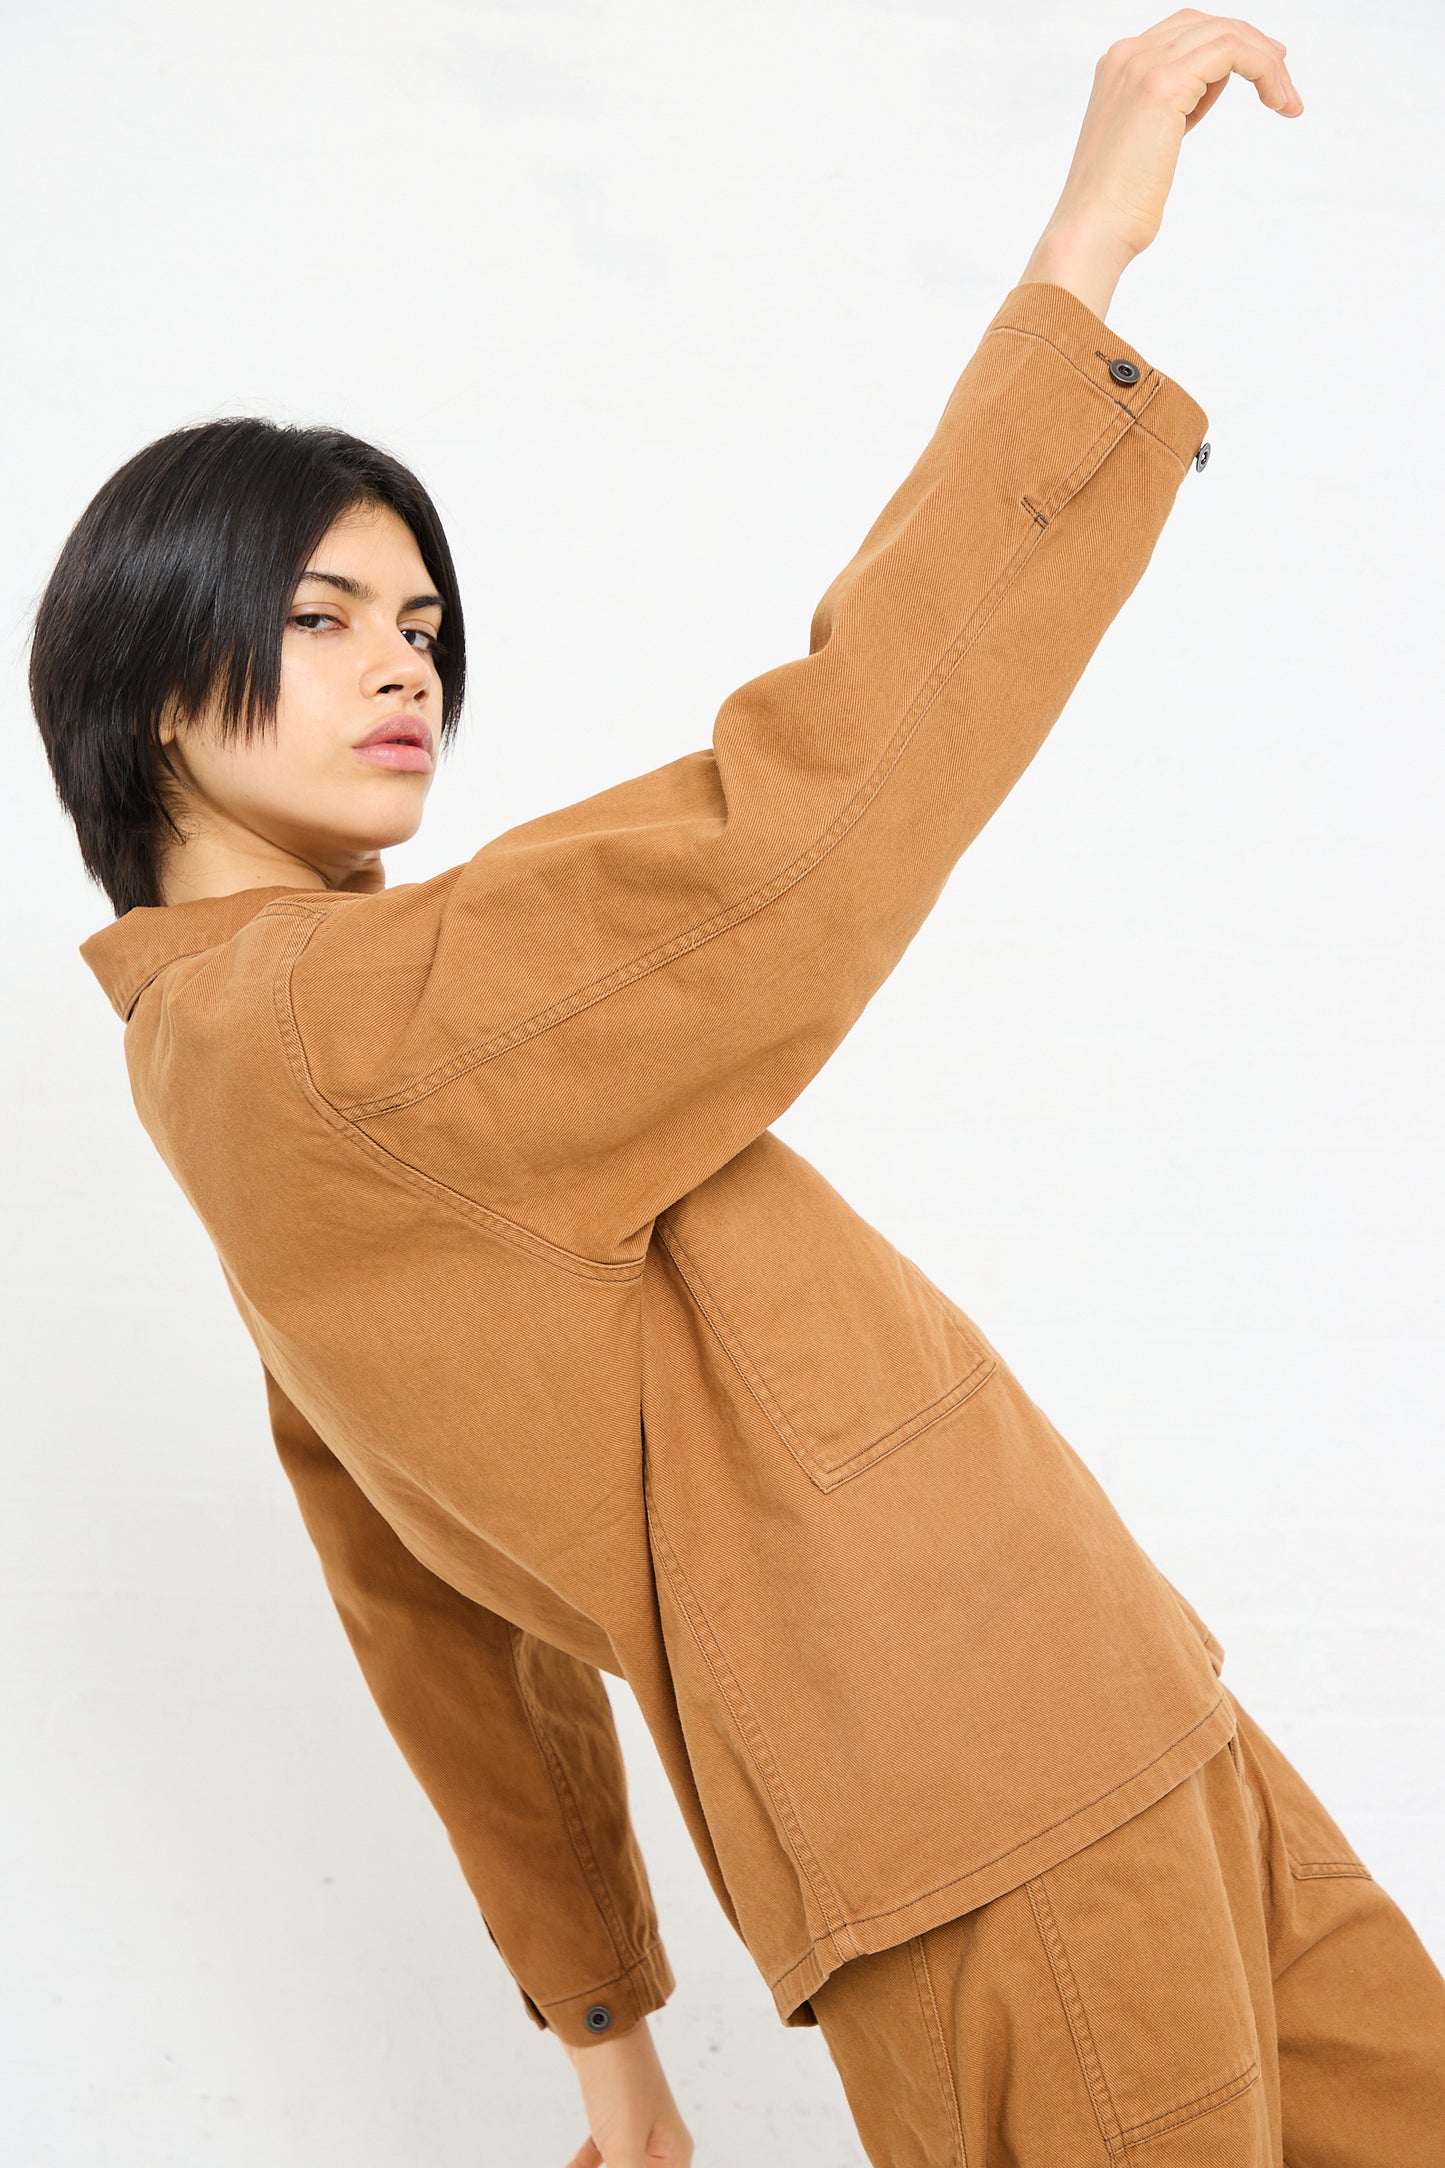 A person in a Chimala Unisex Classic Drill US Army Work Jacket in Camel posing with one arm stretched upward against a white background.